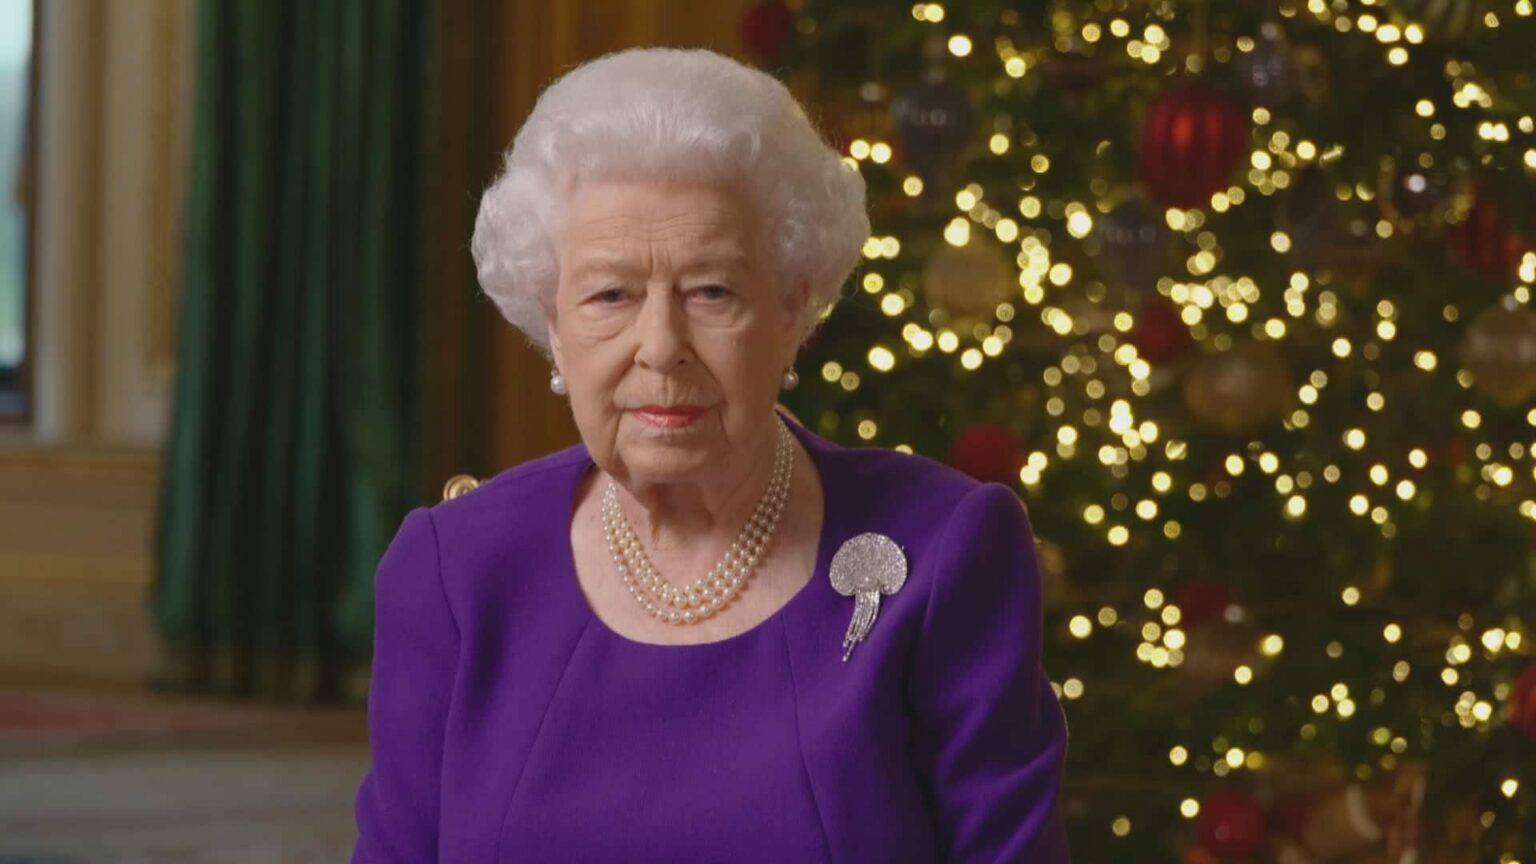 The Queen of England's annual Christmas speech has people wondering if she's still upset about Meghan Markle and Prince Harry leaving the family.